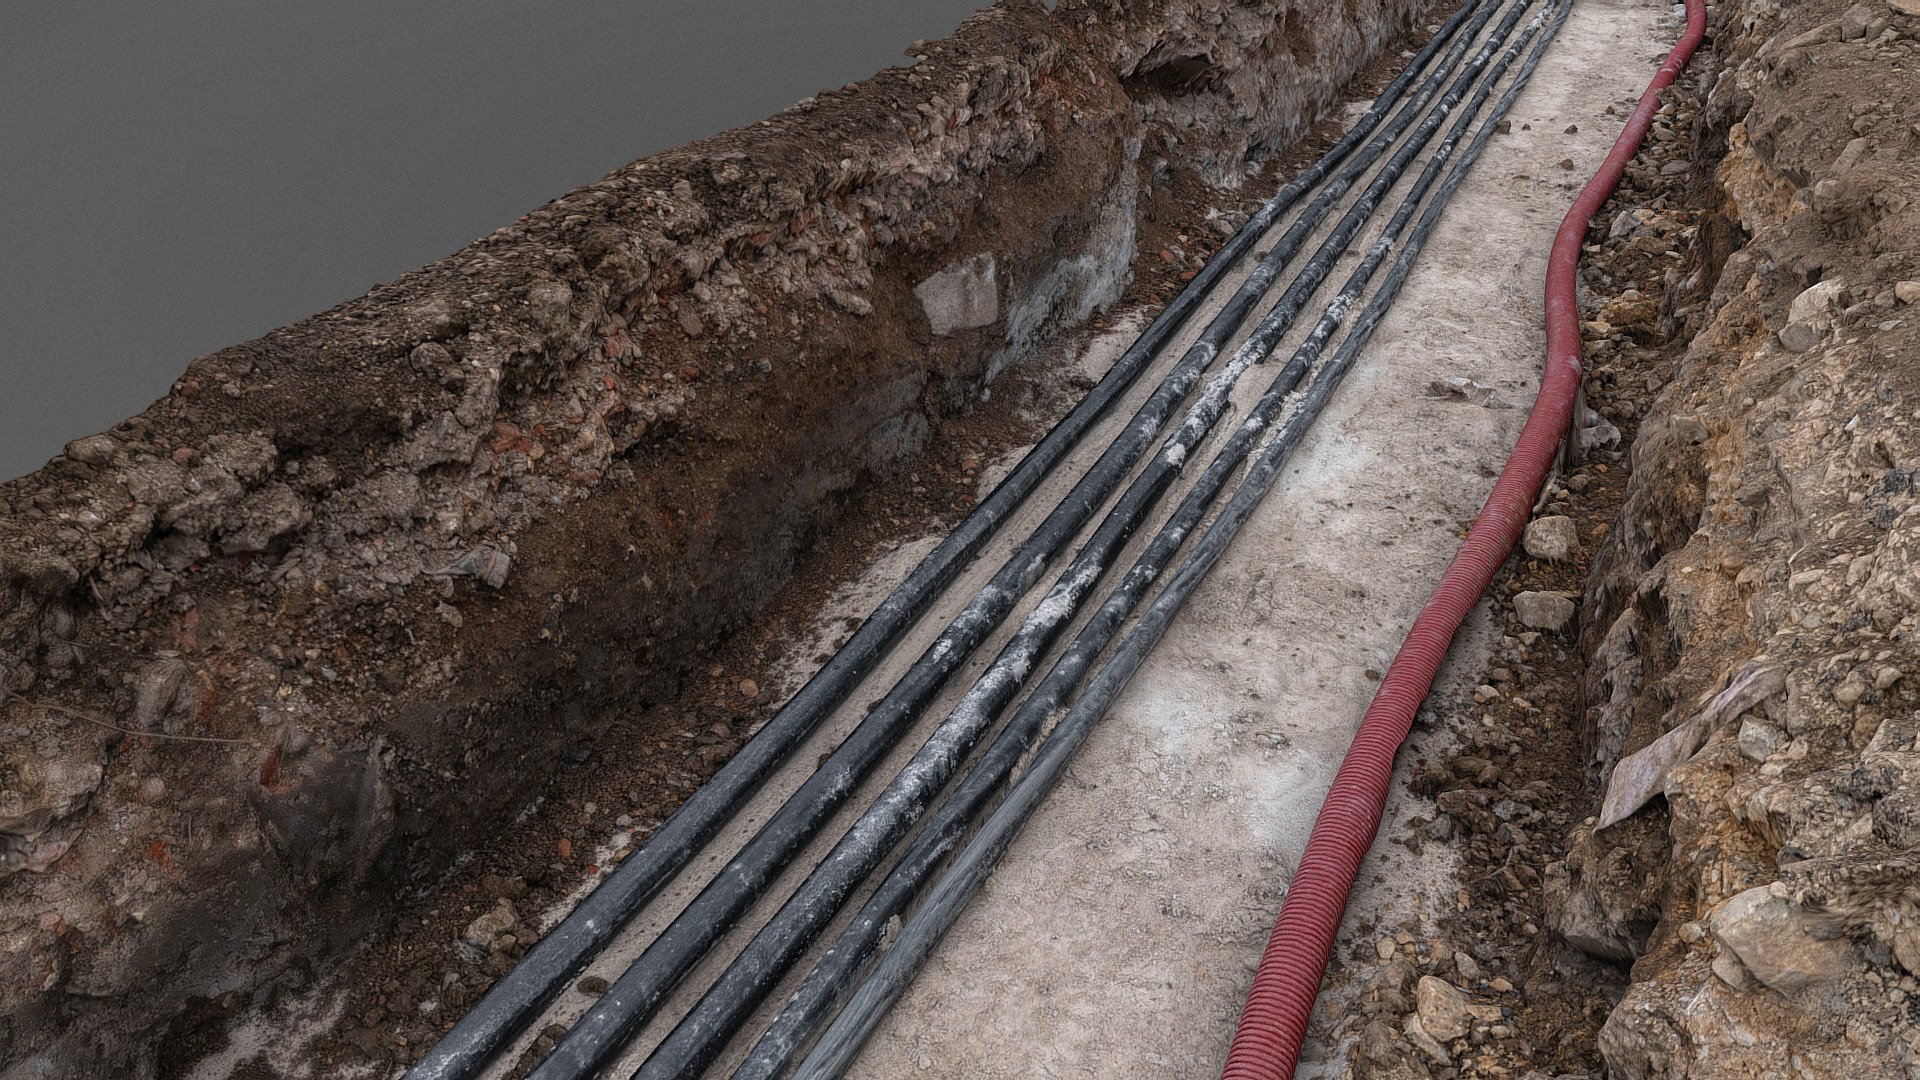 Construction dig site excavation building ground earth work, dug-out trench ditch, probably for Cable broadband fiber repair works dig technical site inspection

Photogrammetry scan 280 x 36MP, 5x8K textures + HD normals - Data line pipes dig - Download Free 3D model by matousekfoto 3d model